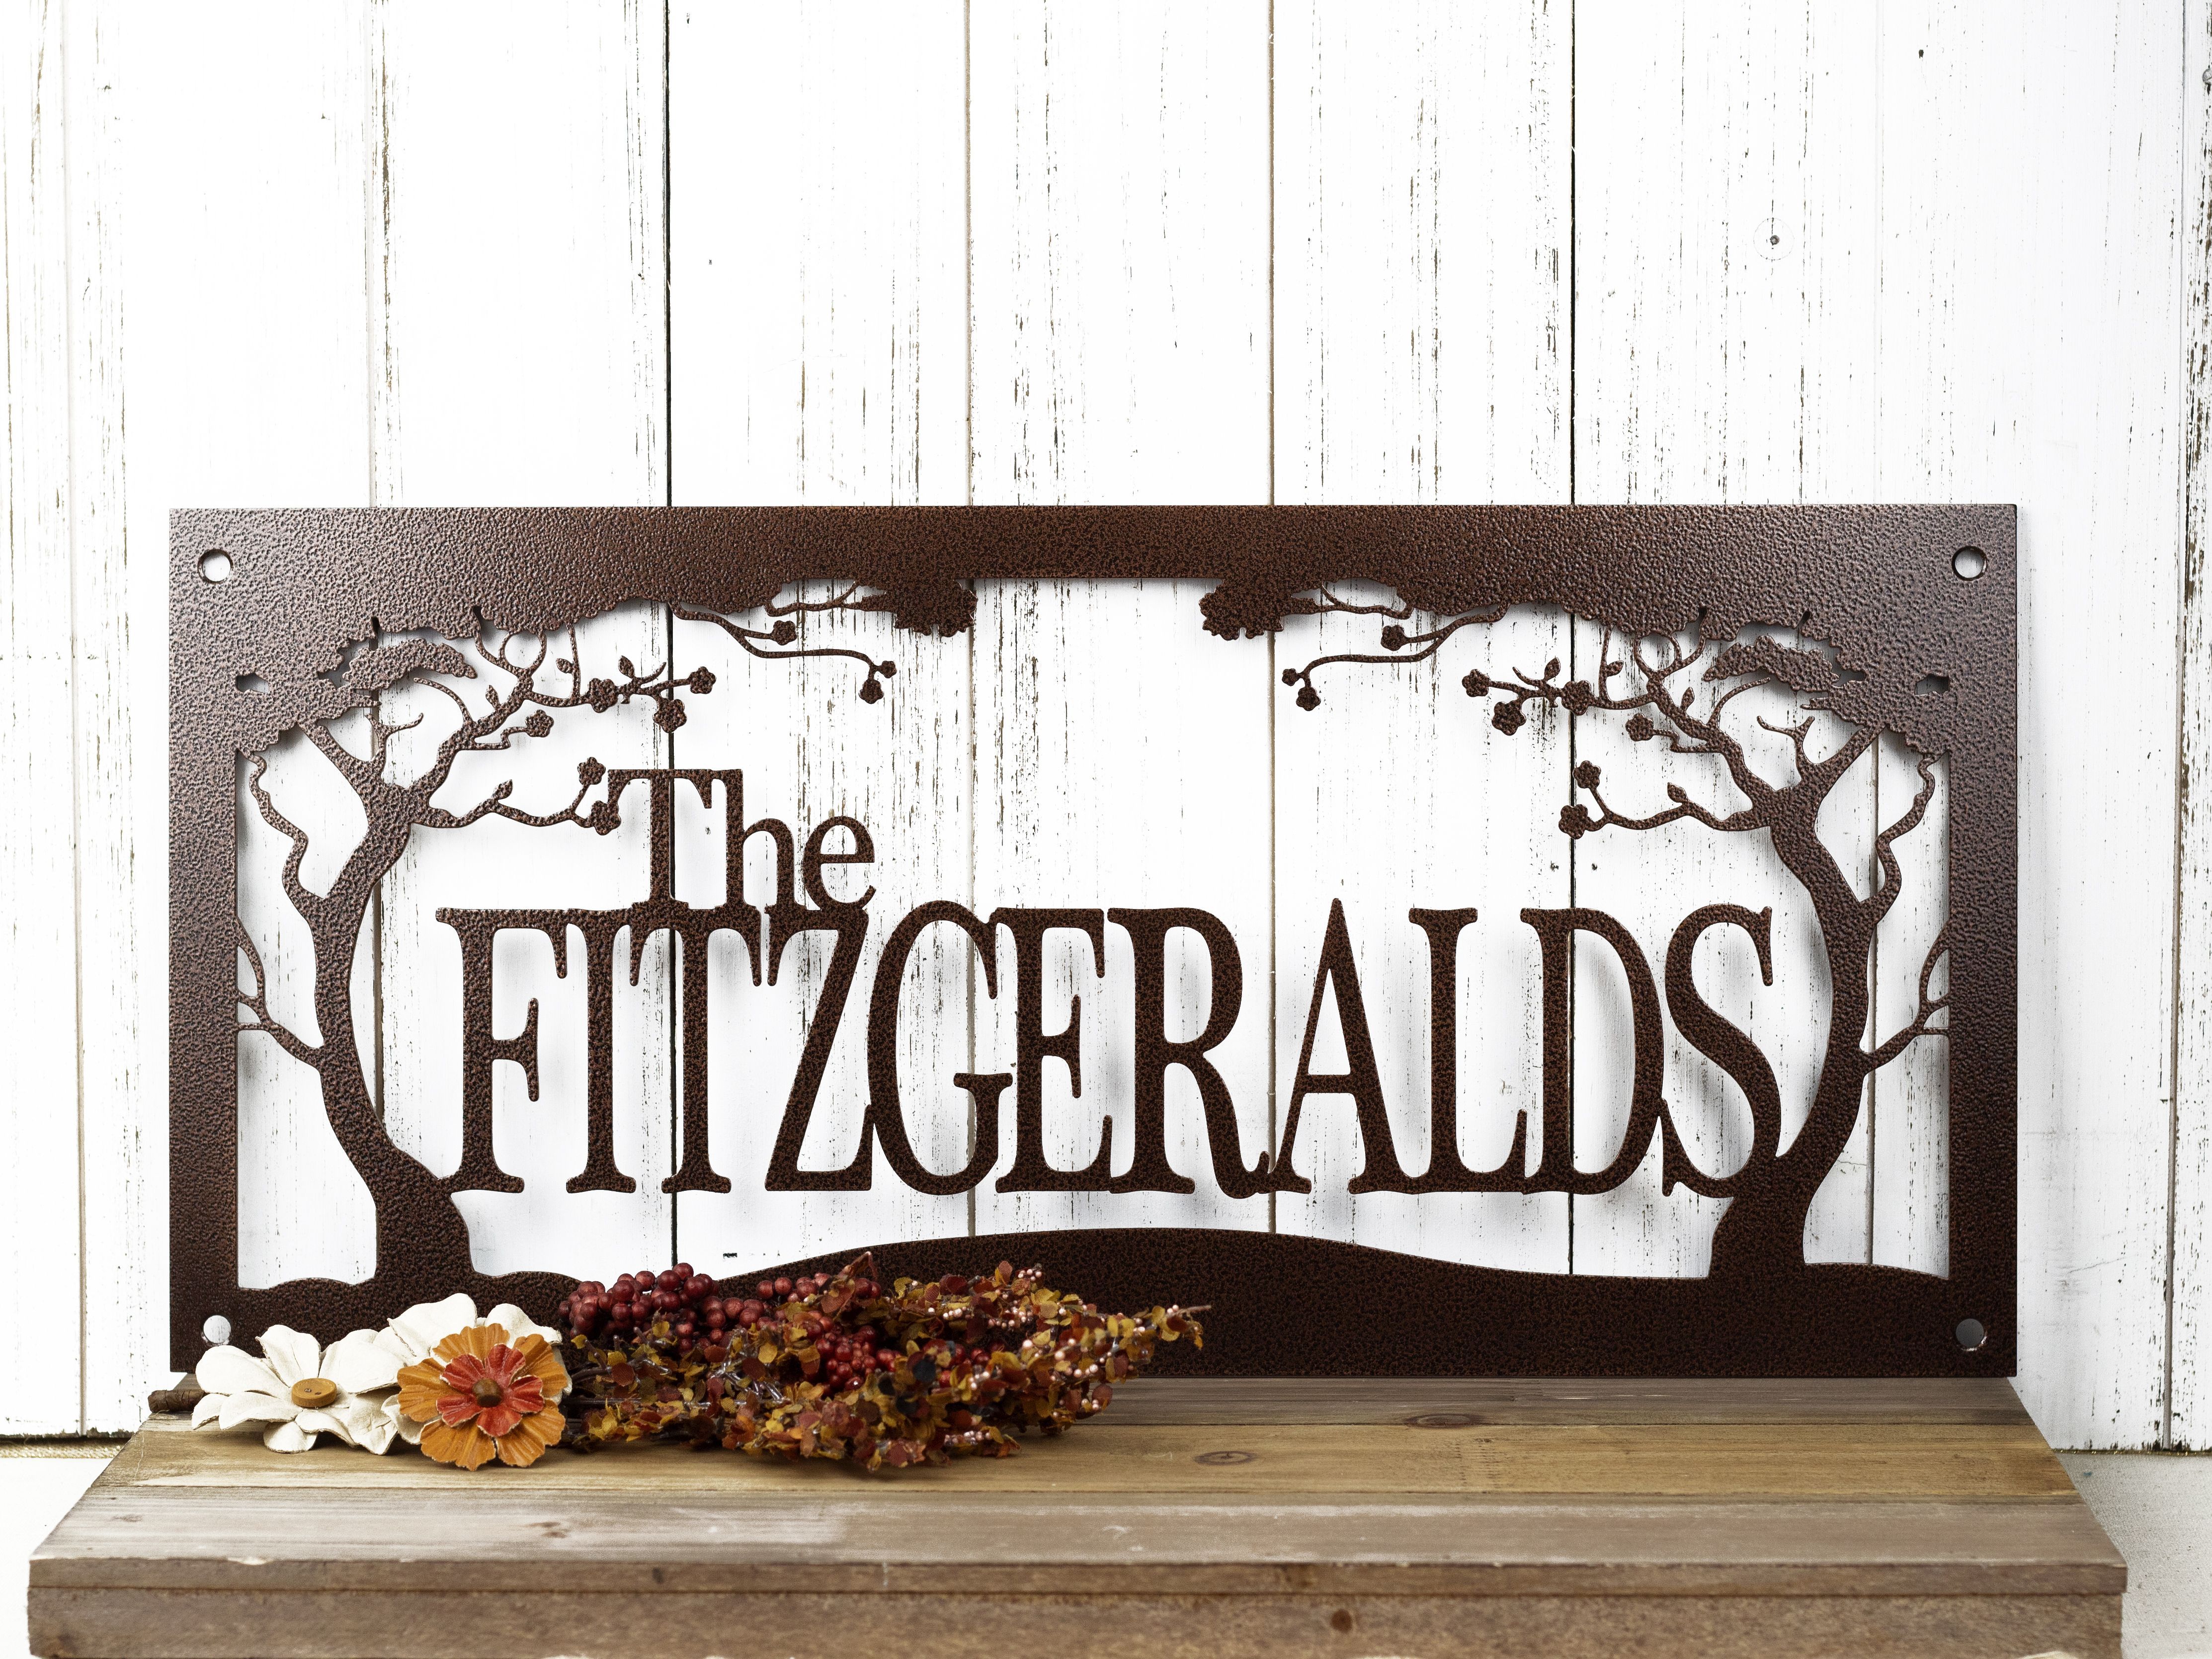 Buy Hand Crafted Personalized Family Name Metal Sign, Custom Wall Art With  Cherry Trees, Made To Order From Refined Inspirations, Inc. | Custommade Pertaining To Most Up To Date Family Wall Sign Metal (Gallery 7 of 20)